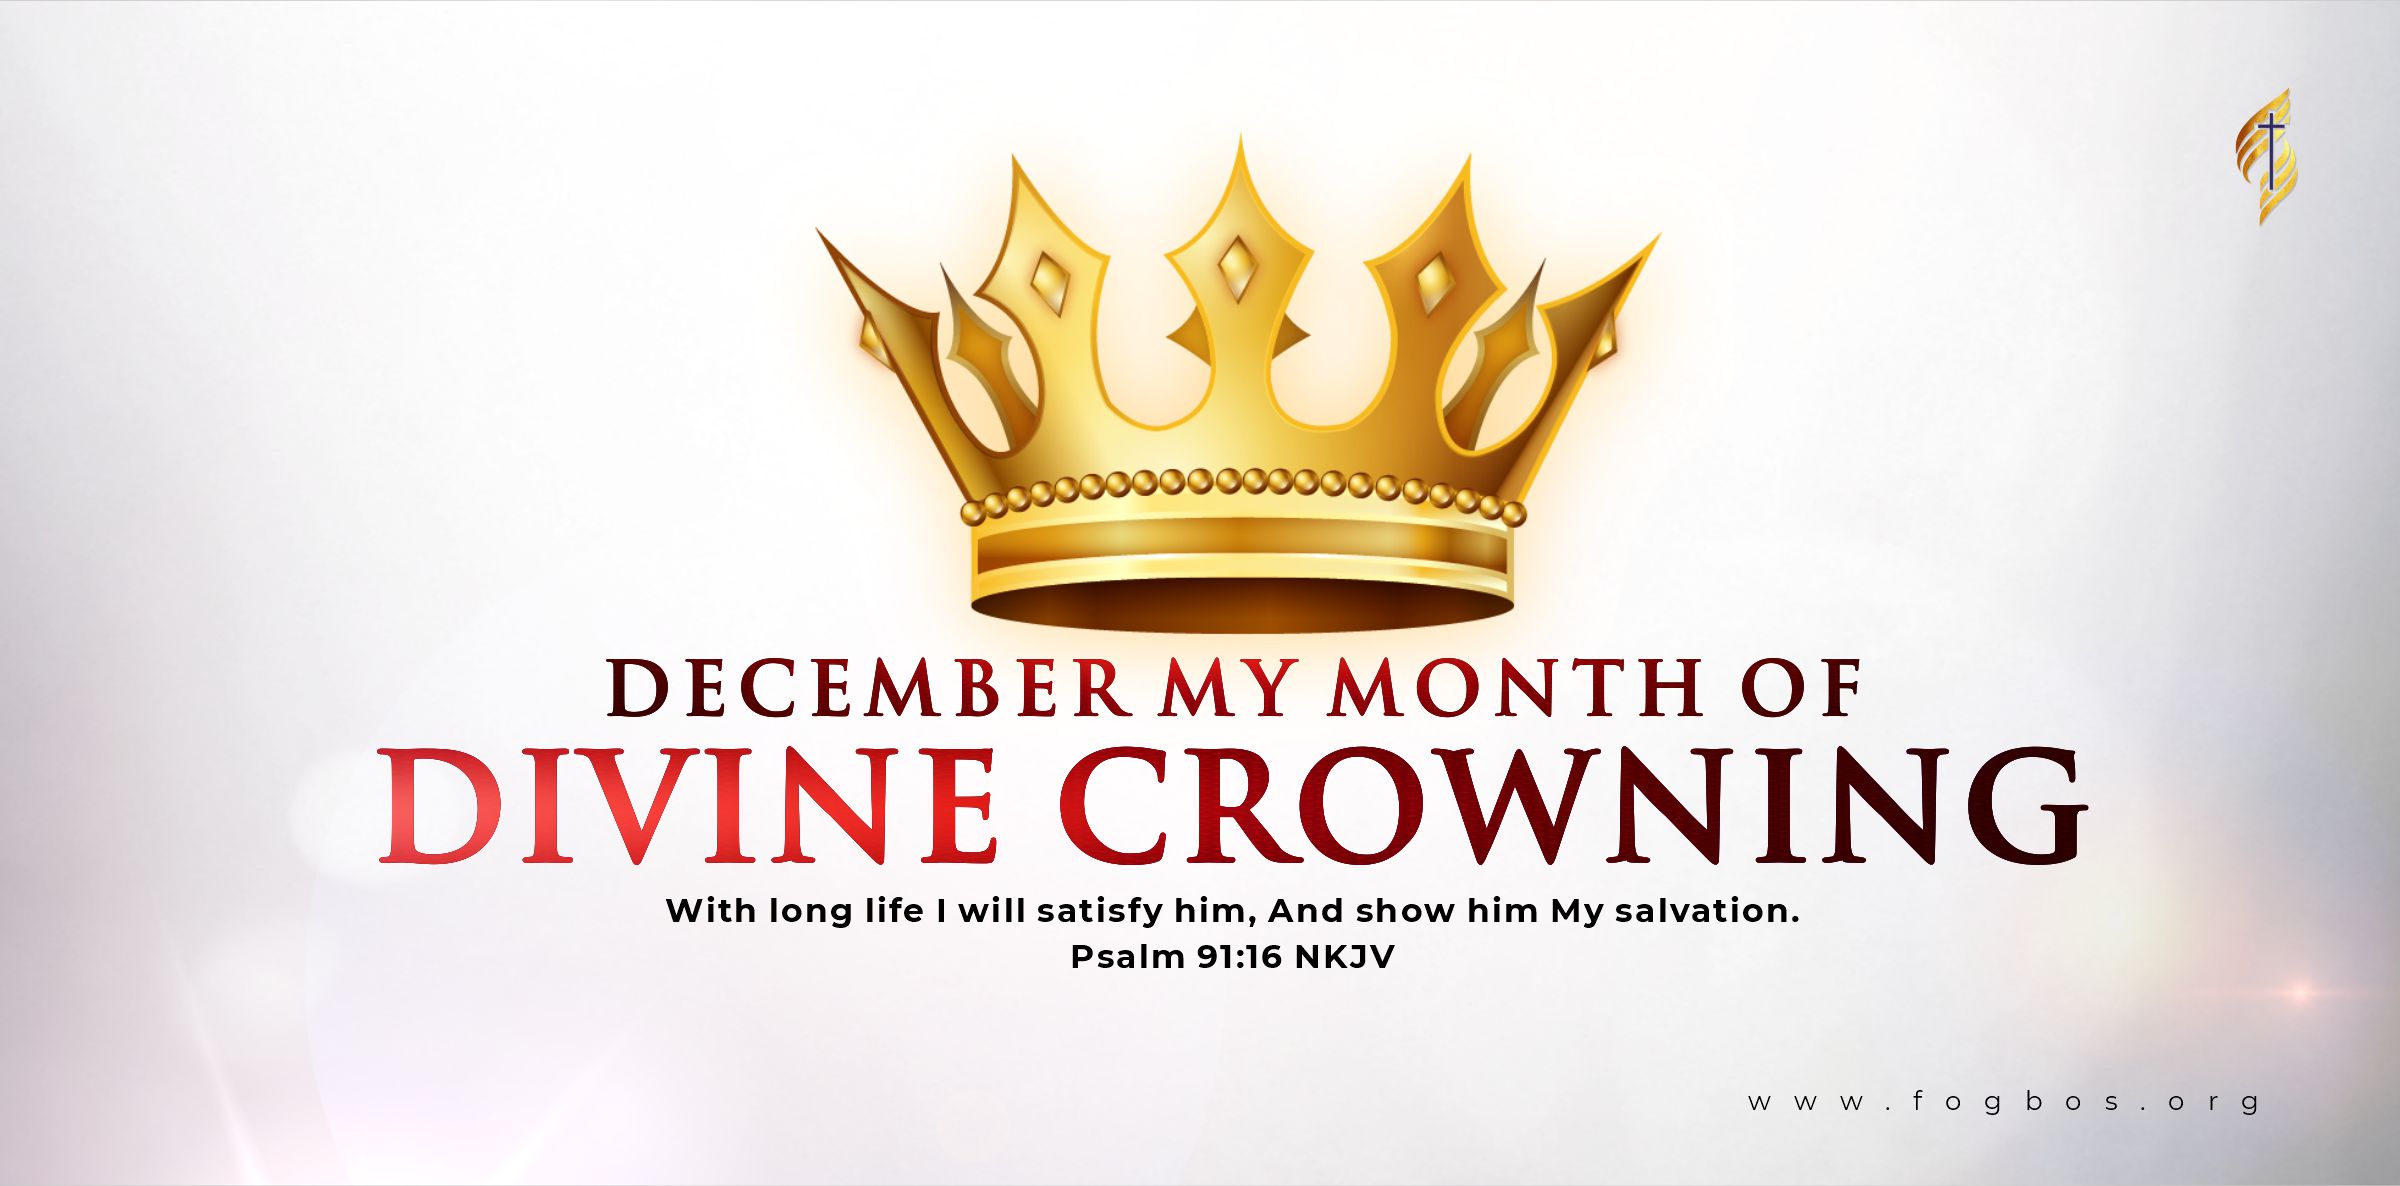 December My Month of Divine Crowning